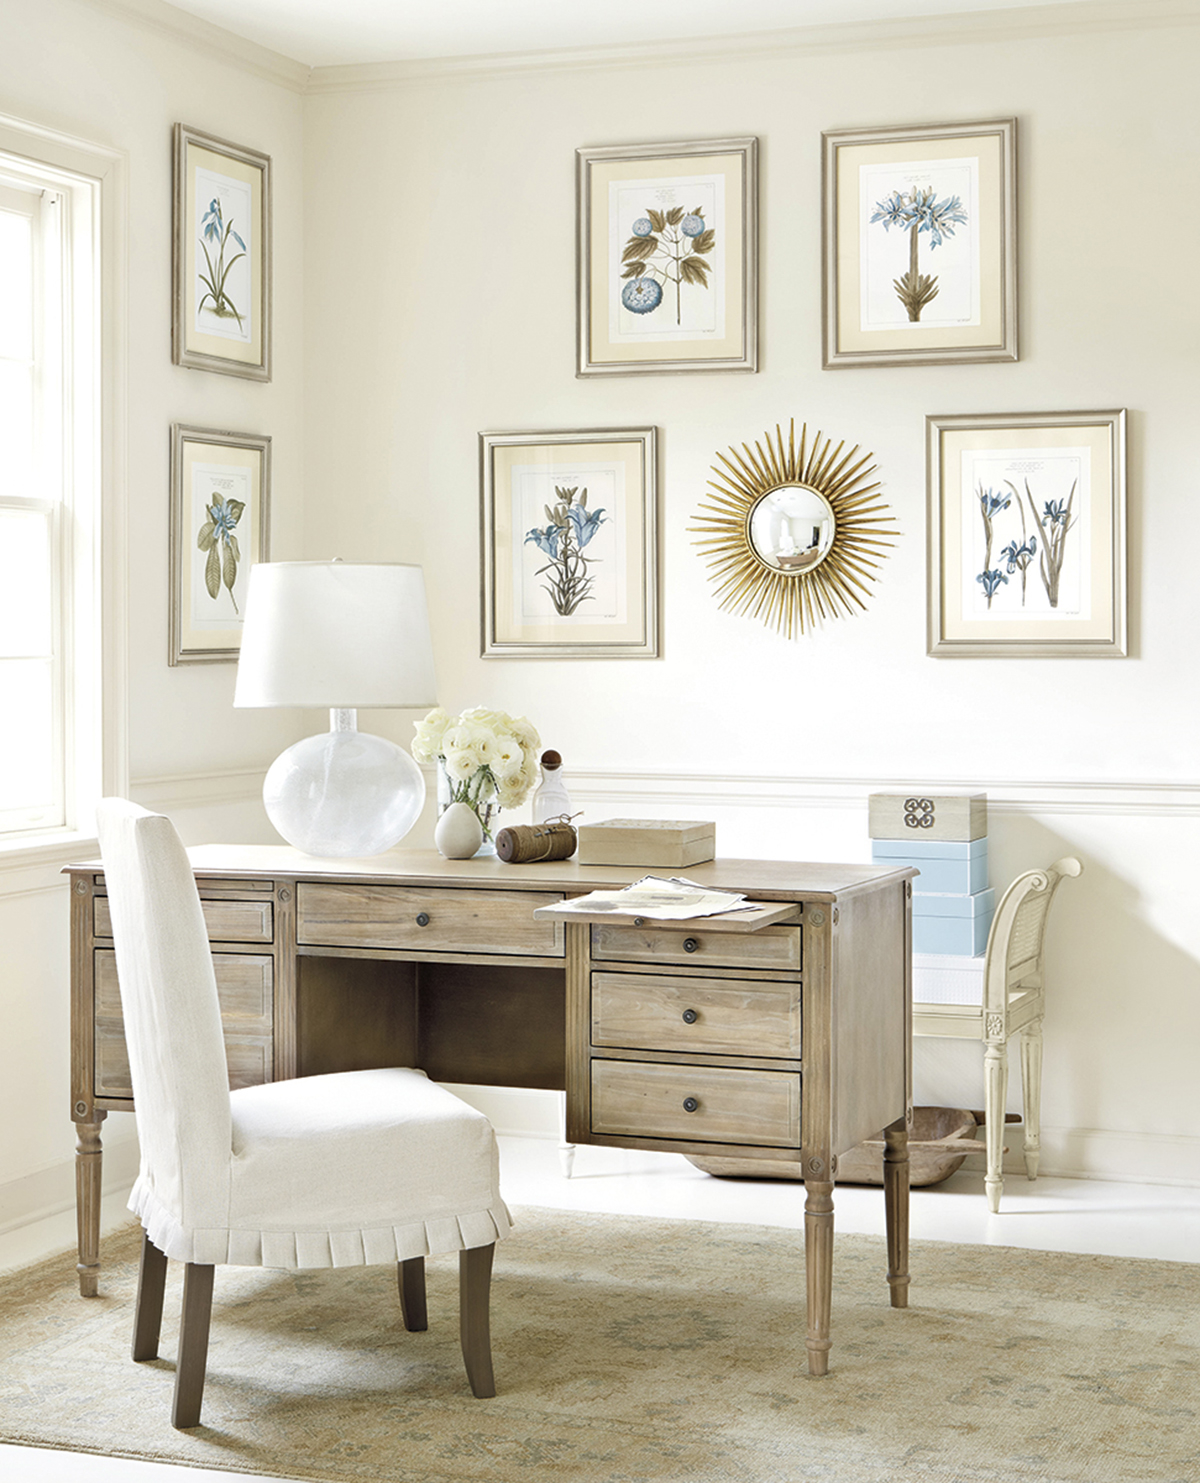 Small-sunburst-mirror-is-a-part-of-a-wall-gallery-in-a-serene-room